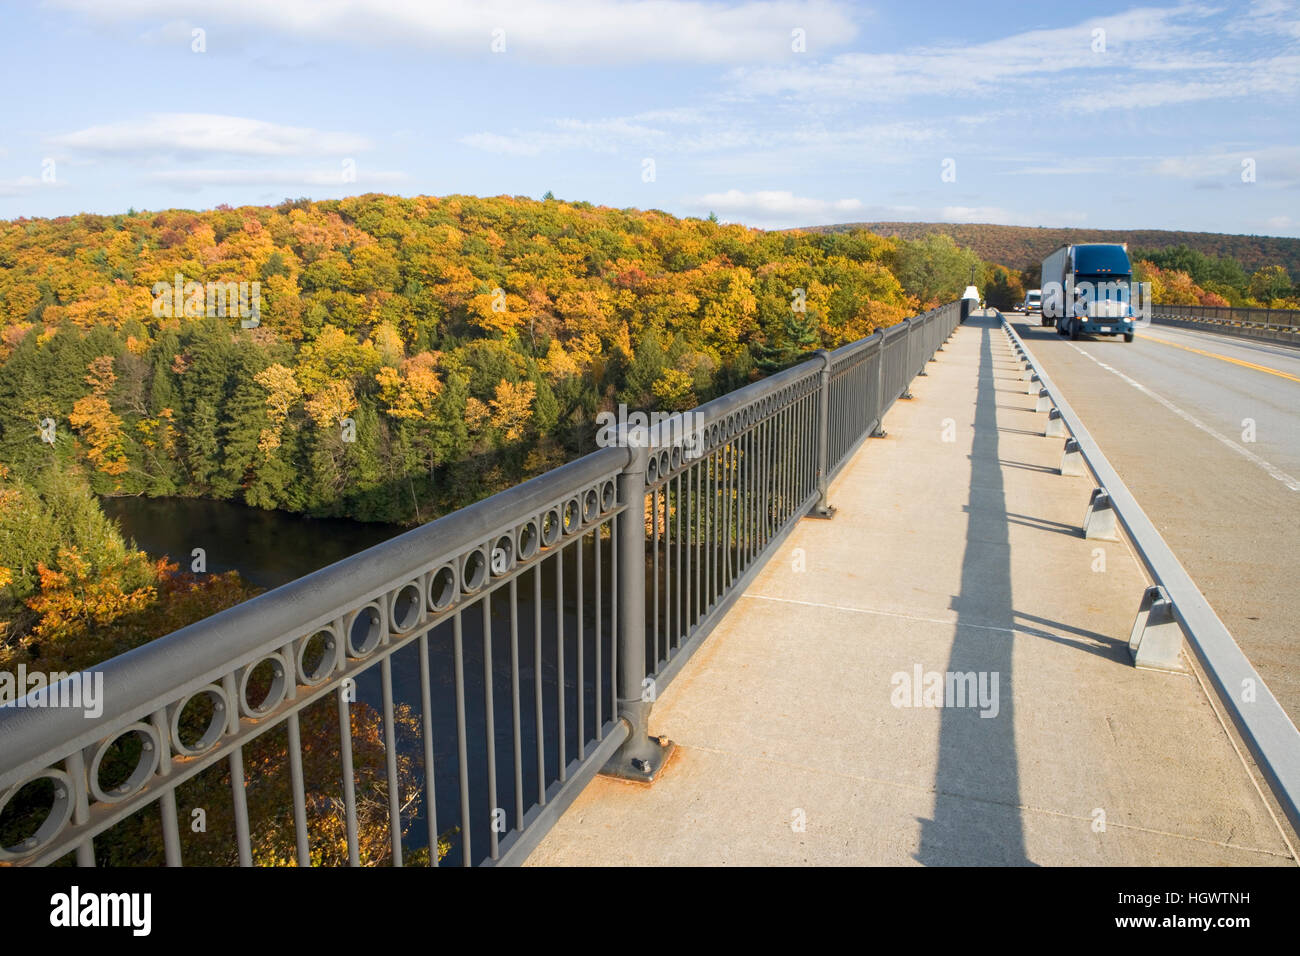 The French King Bridge spans the Connecticut River in Erving, Massachusetts.  Route 2 - Mohawk Highway. Fall. Stock Photo